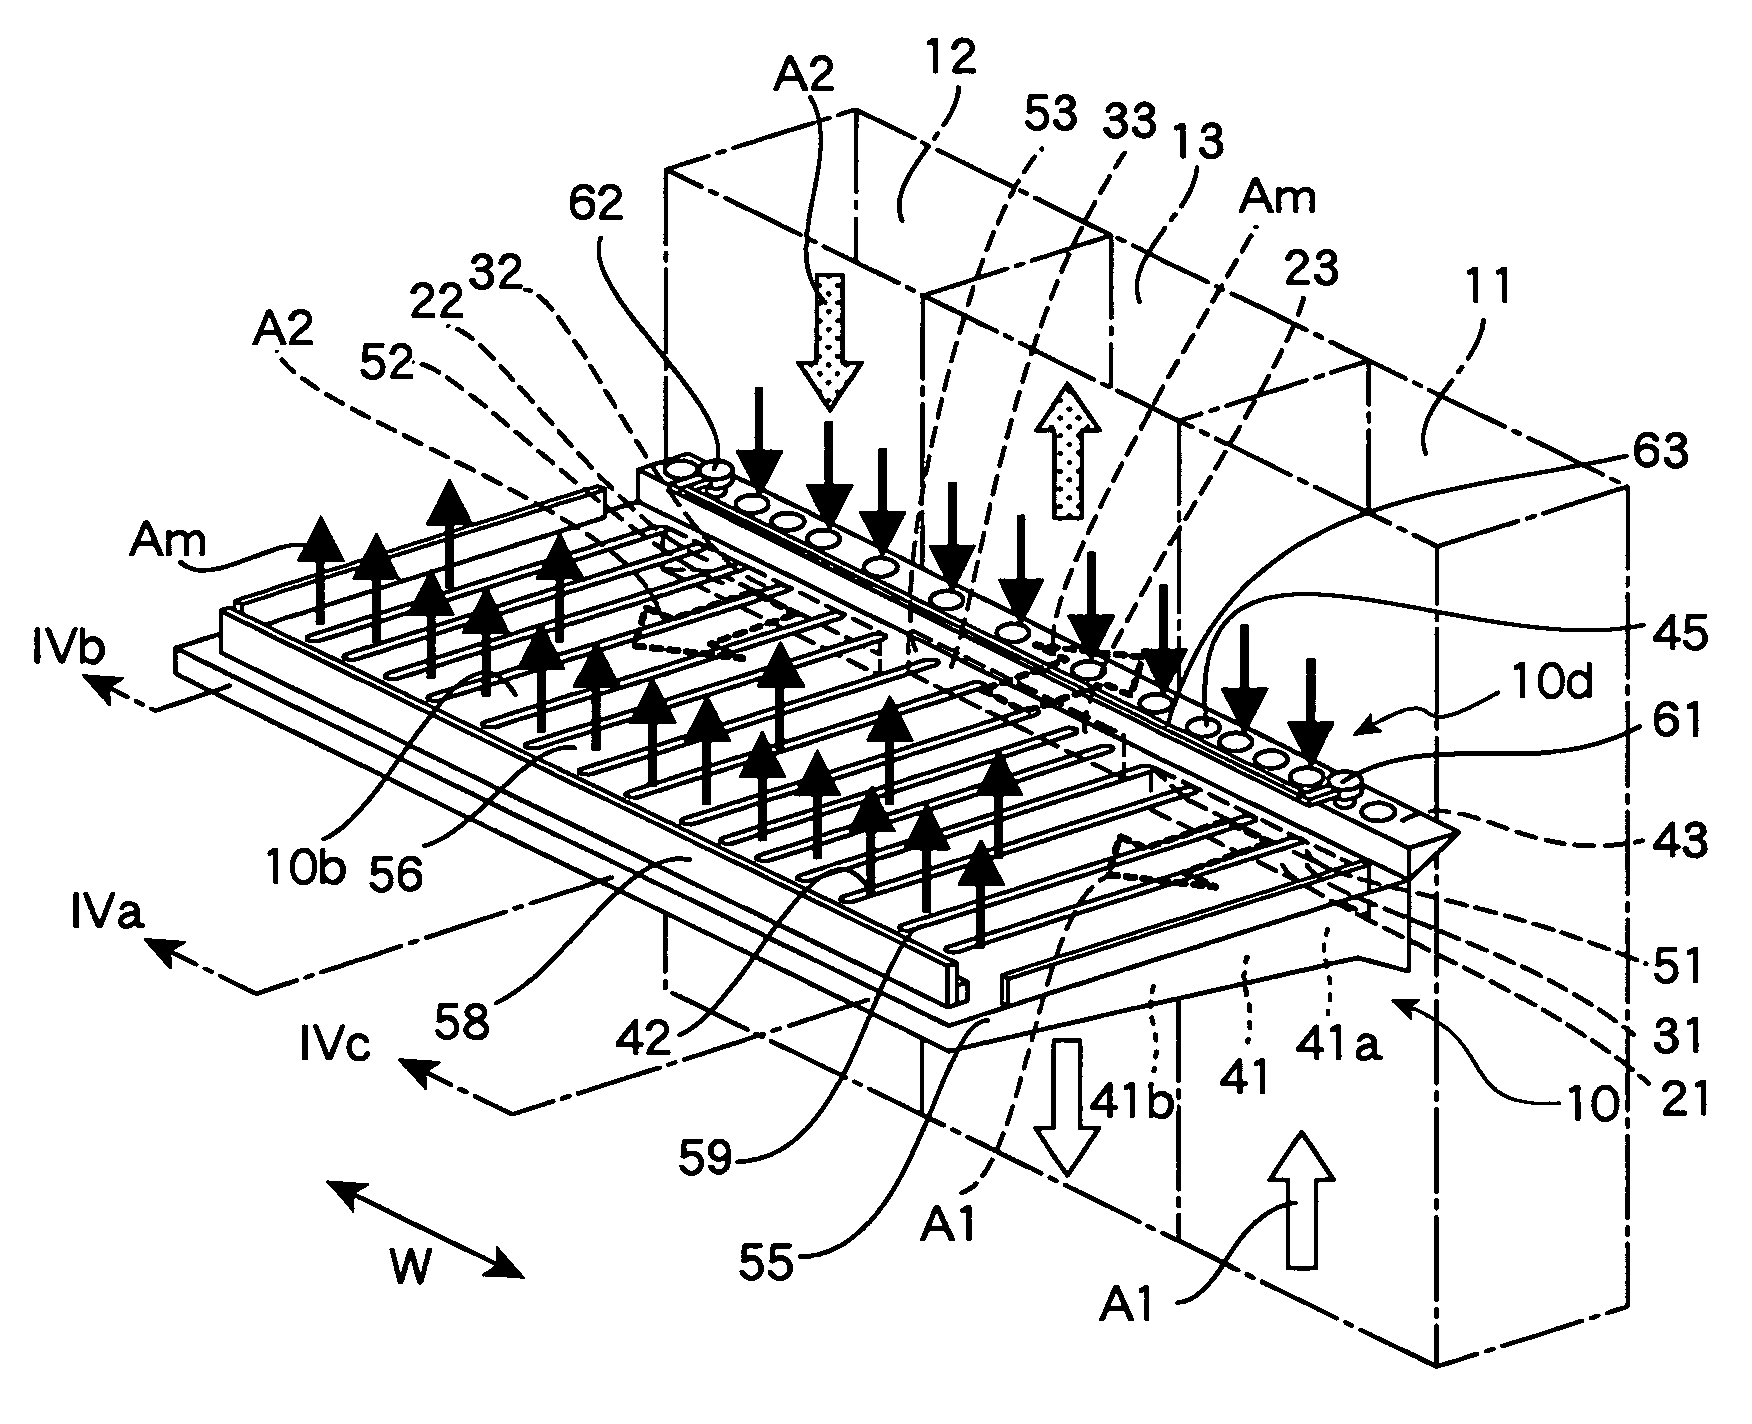 Receiving device